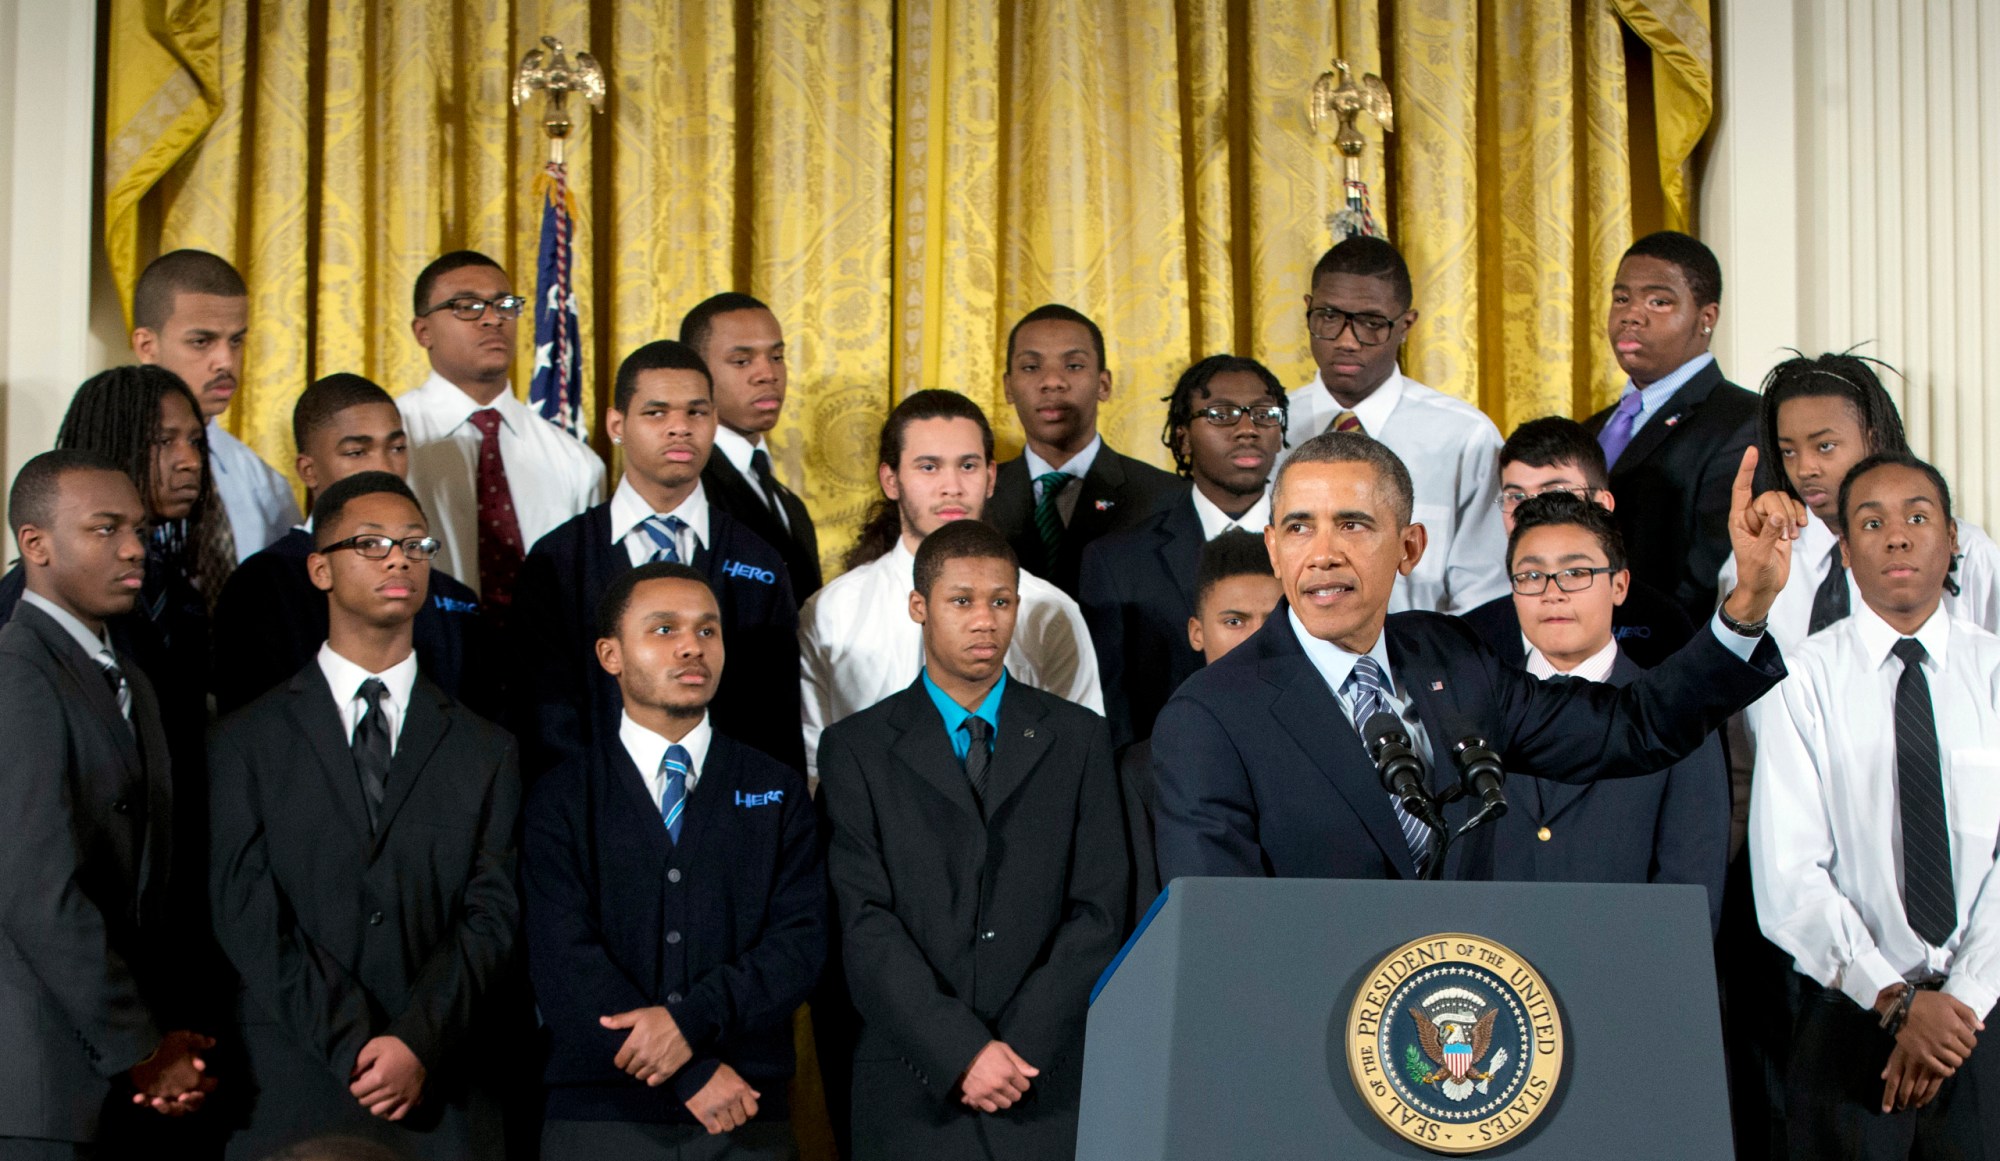 Joined at the White House by young men of color, President Barack Obama promotes his 